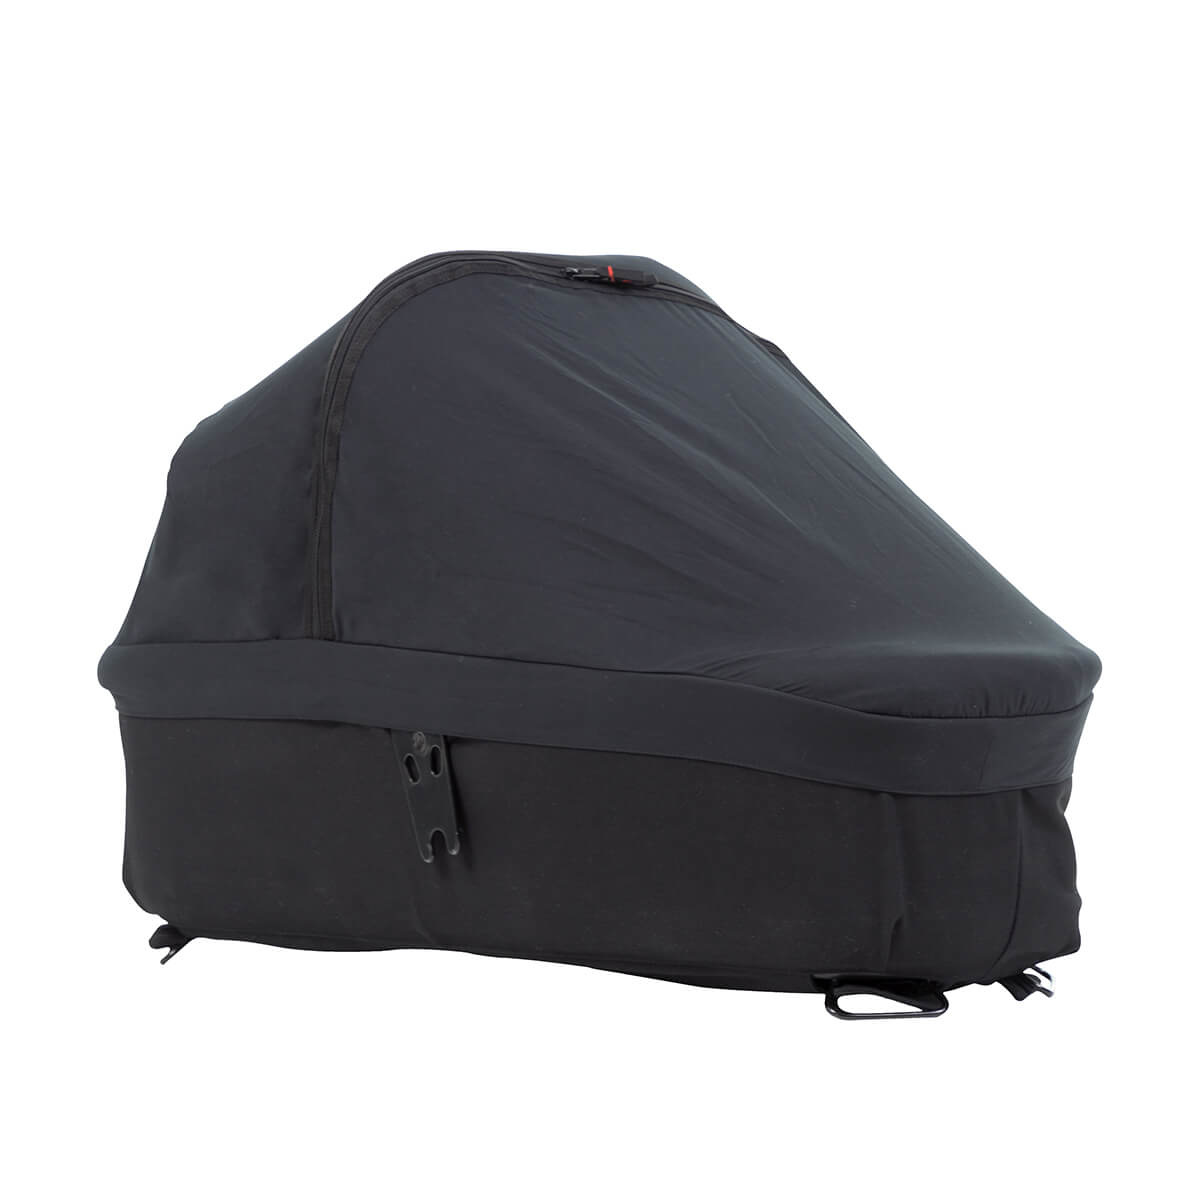 Mountain Buggy Mountainbuggy Carrycot Suncover